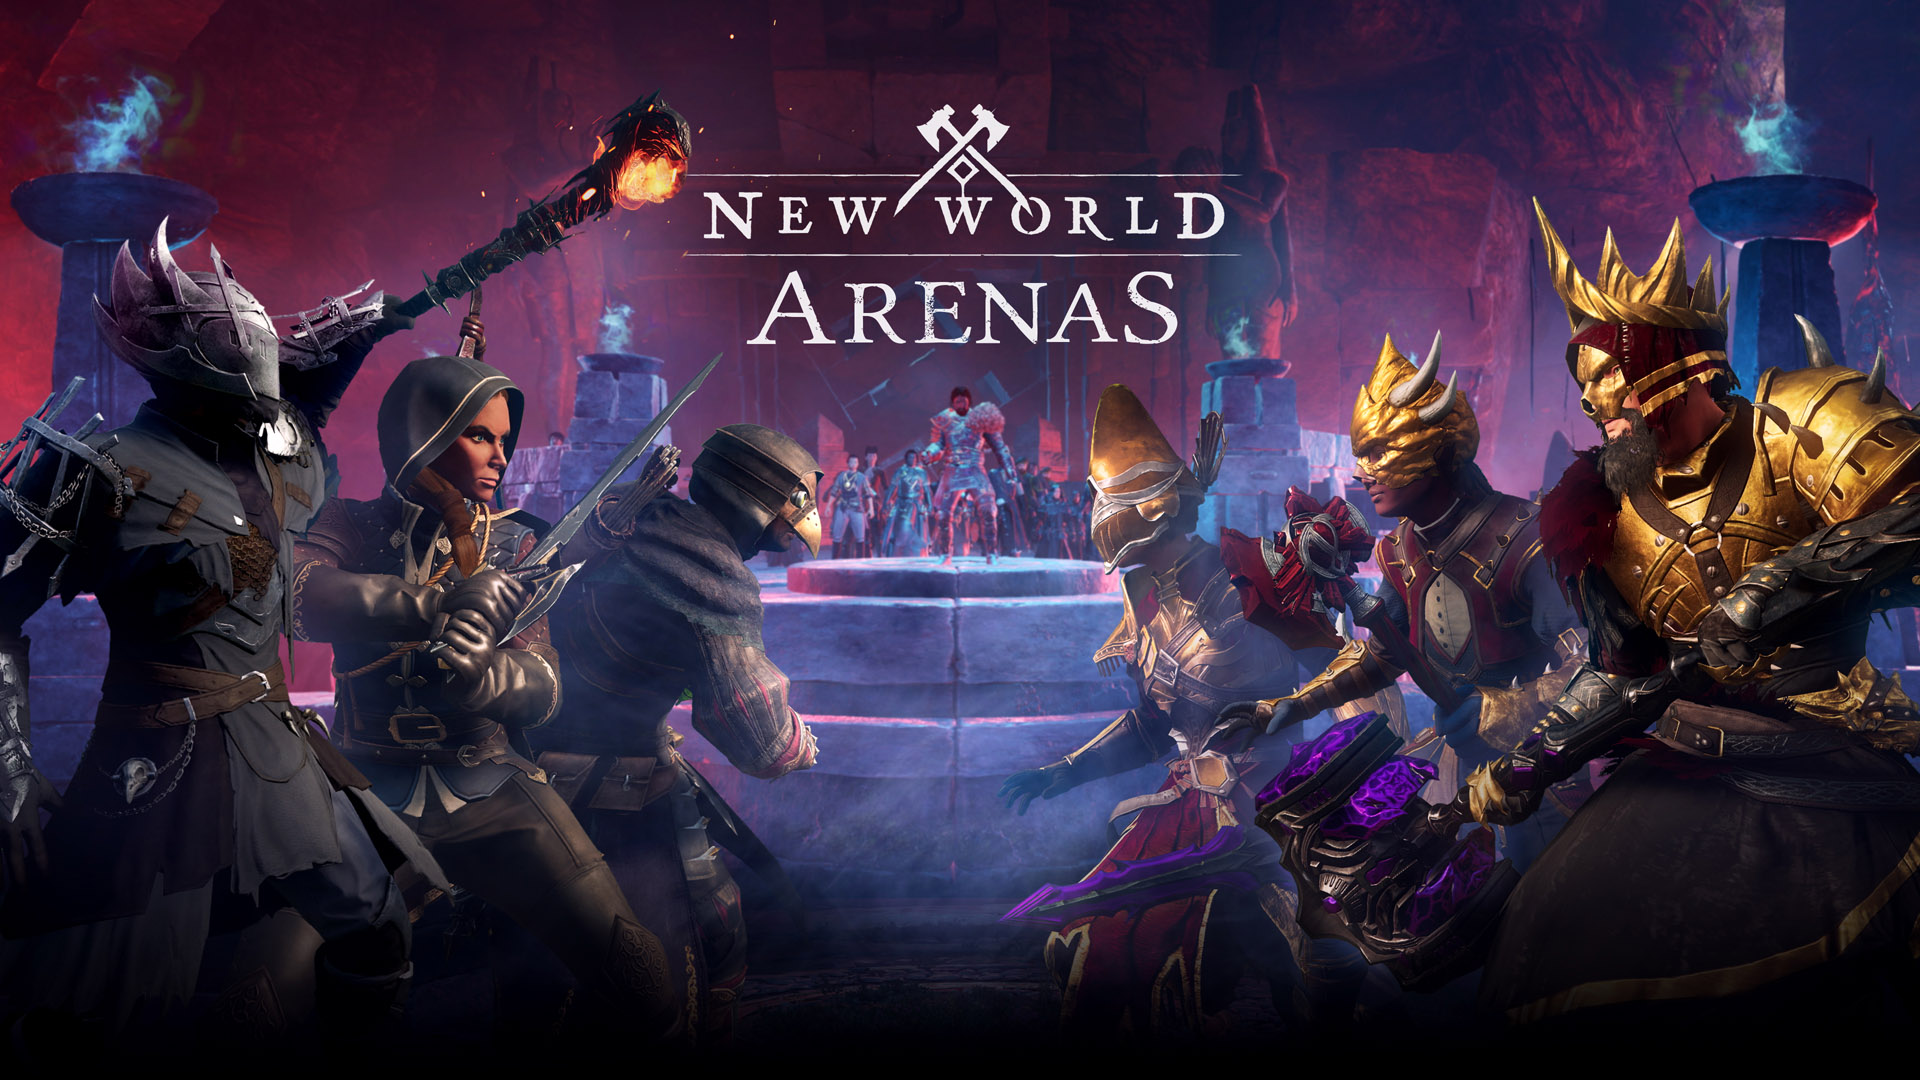 s 'New World' MMORPG is finally here